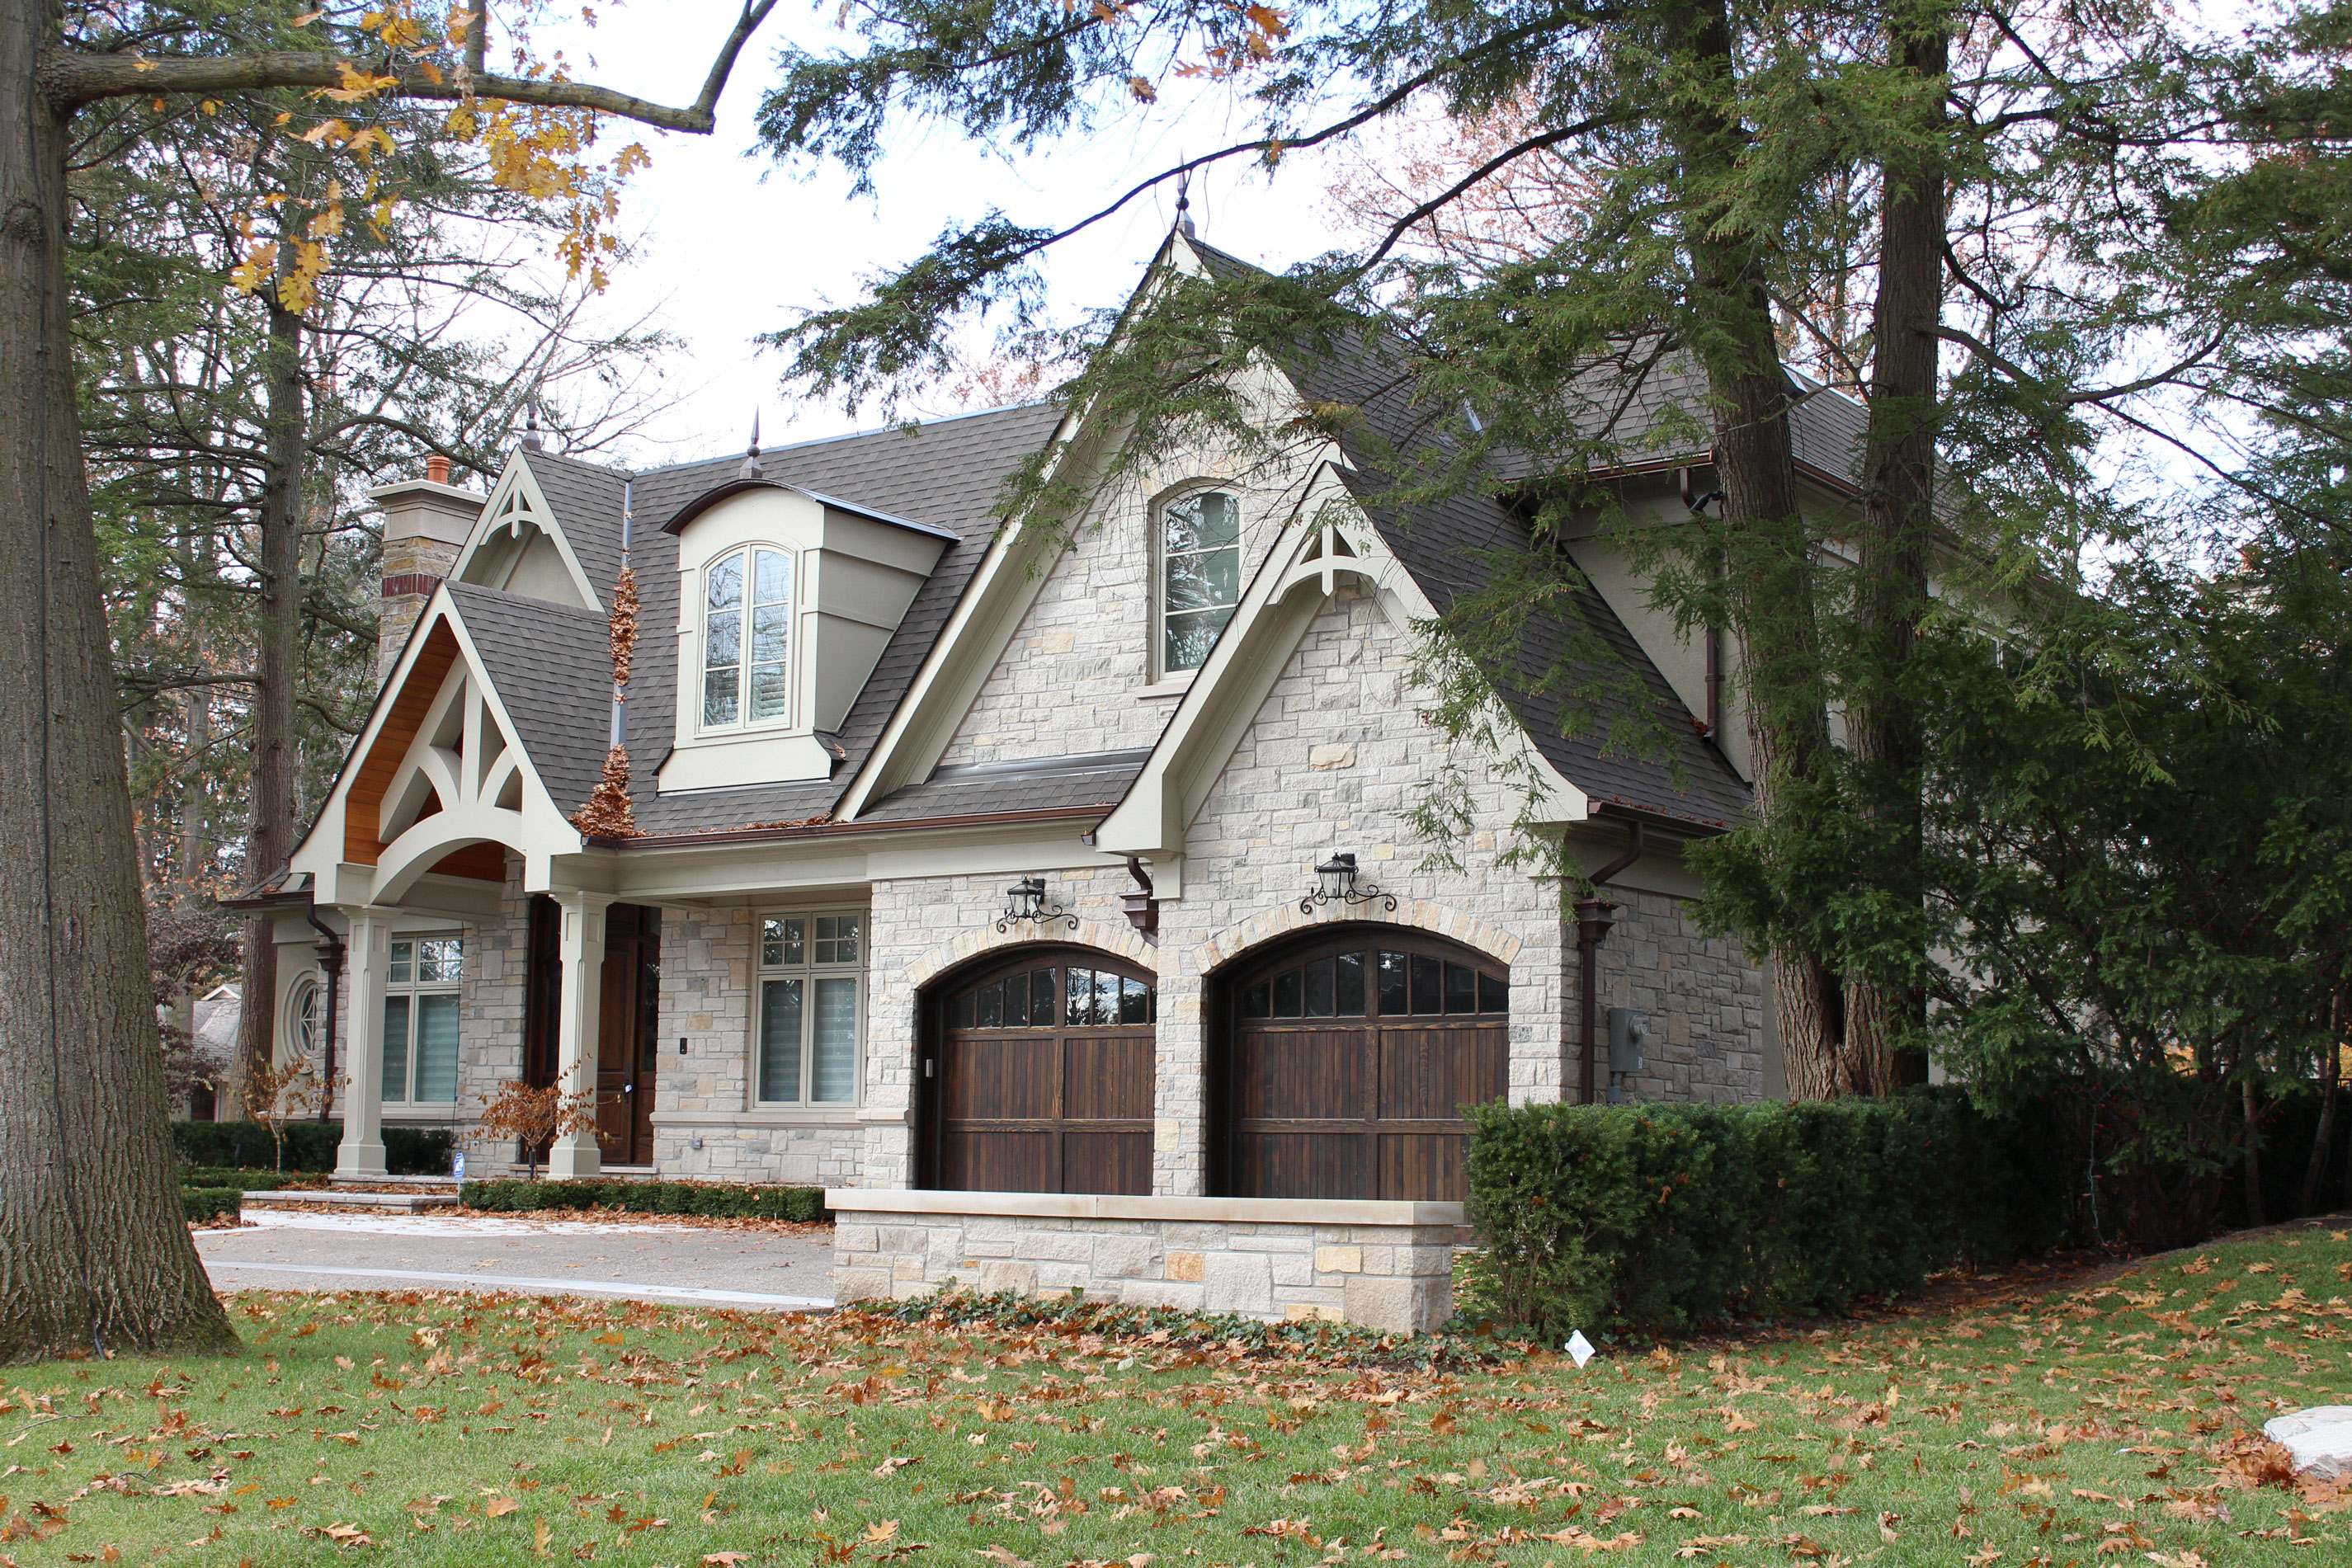 Front view of house - Stone colour is Eramosa Saw Cut